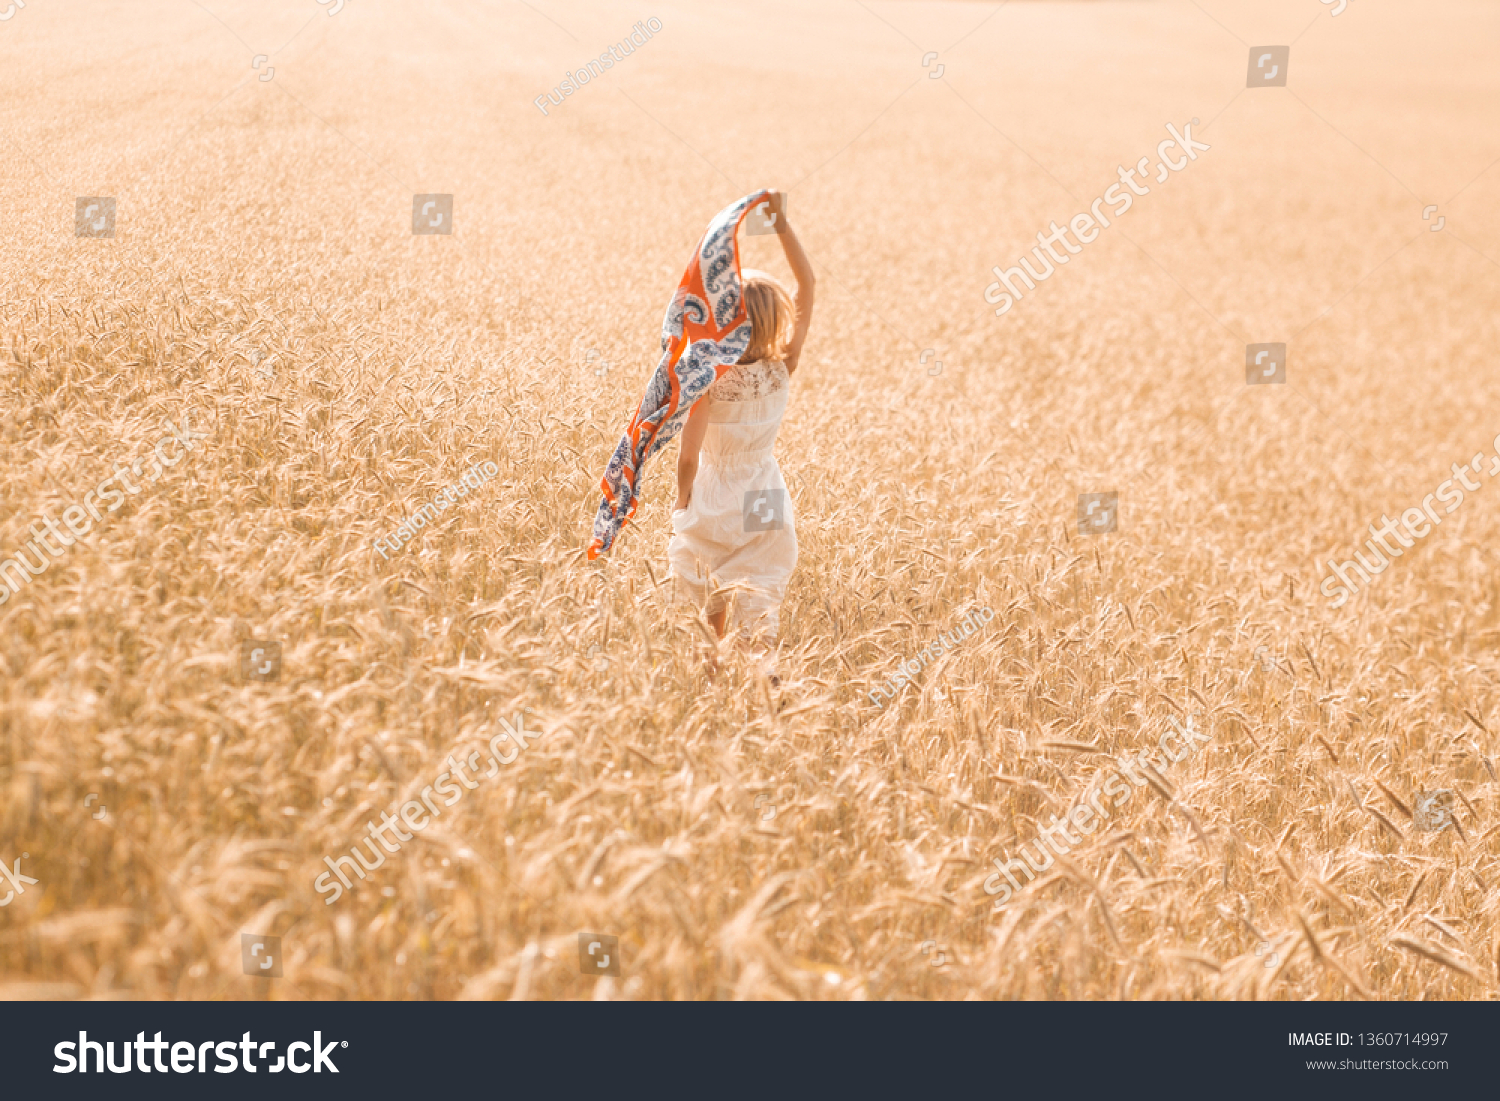 Blonde girl model on a wheat field. Young woman enjoying nature. Beautiful girl running in the rays of sunlight. Sunlight. #1360714997